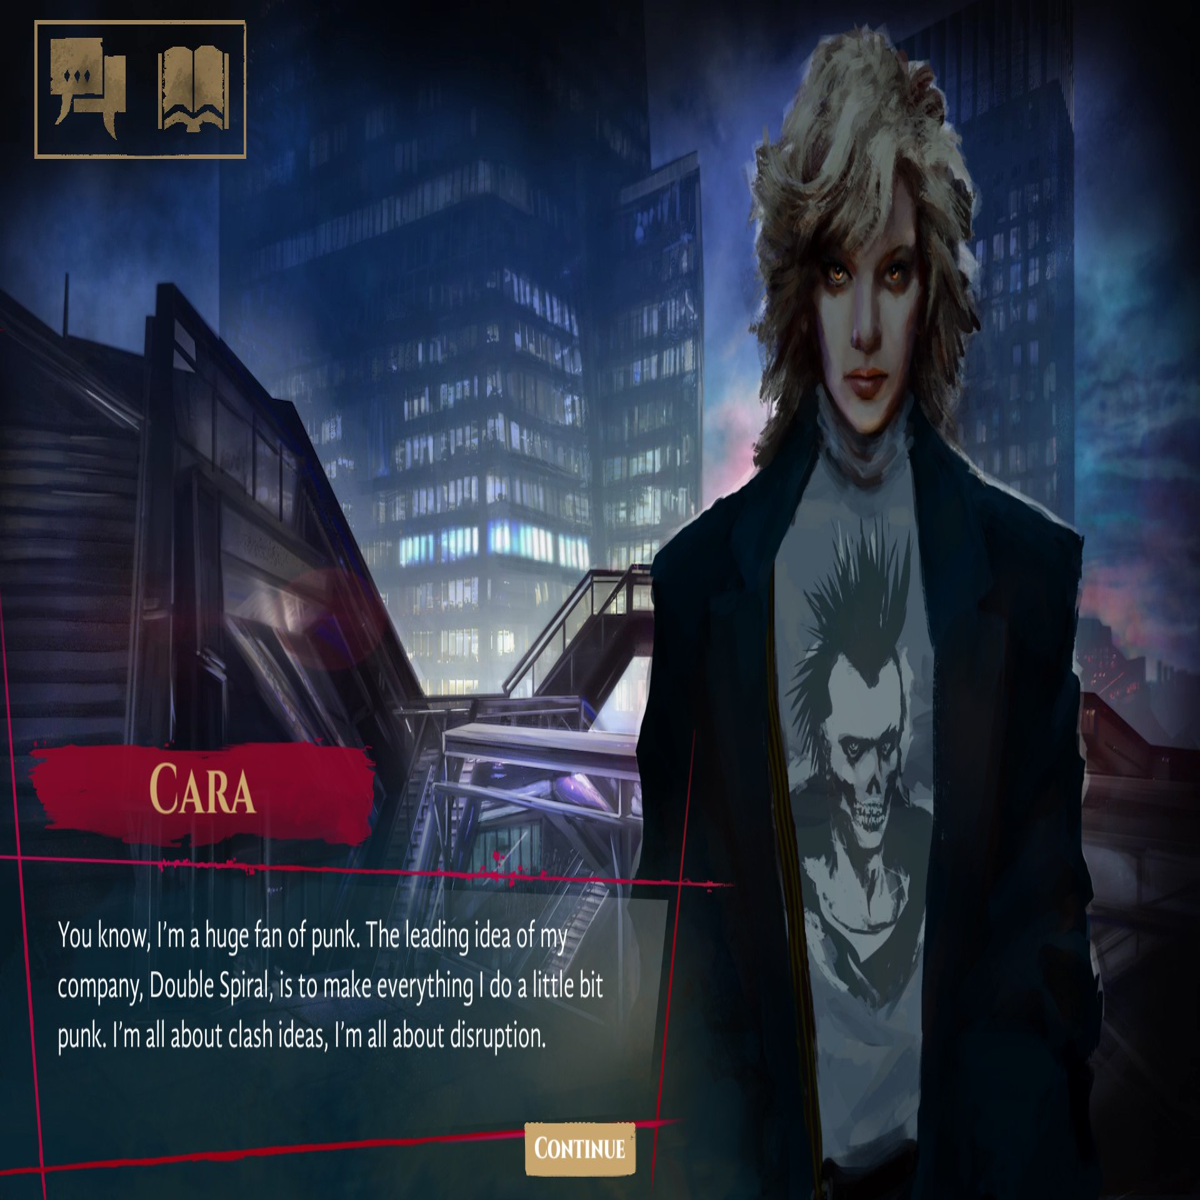 Vampire: The Masquerade – Coteries of New York is Coming to PC and